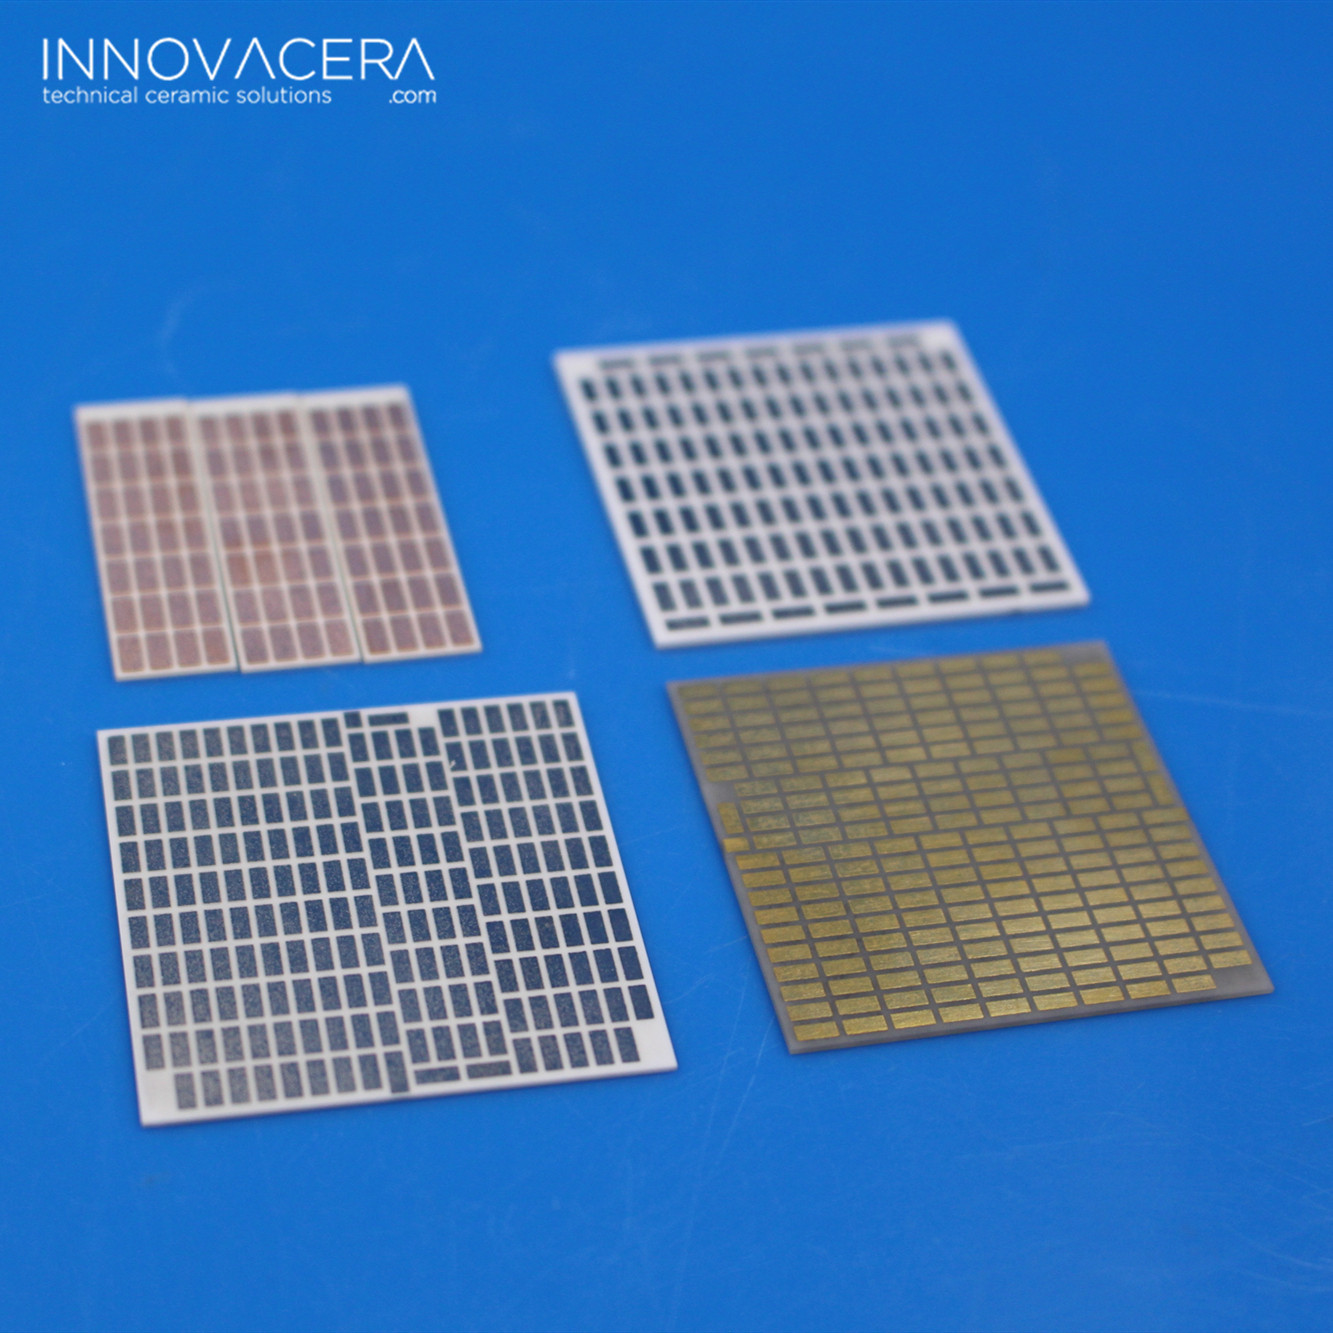 What Are The Advantages Of Metallized Ceramic Substrates In LED Packaging